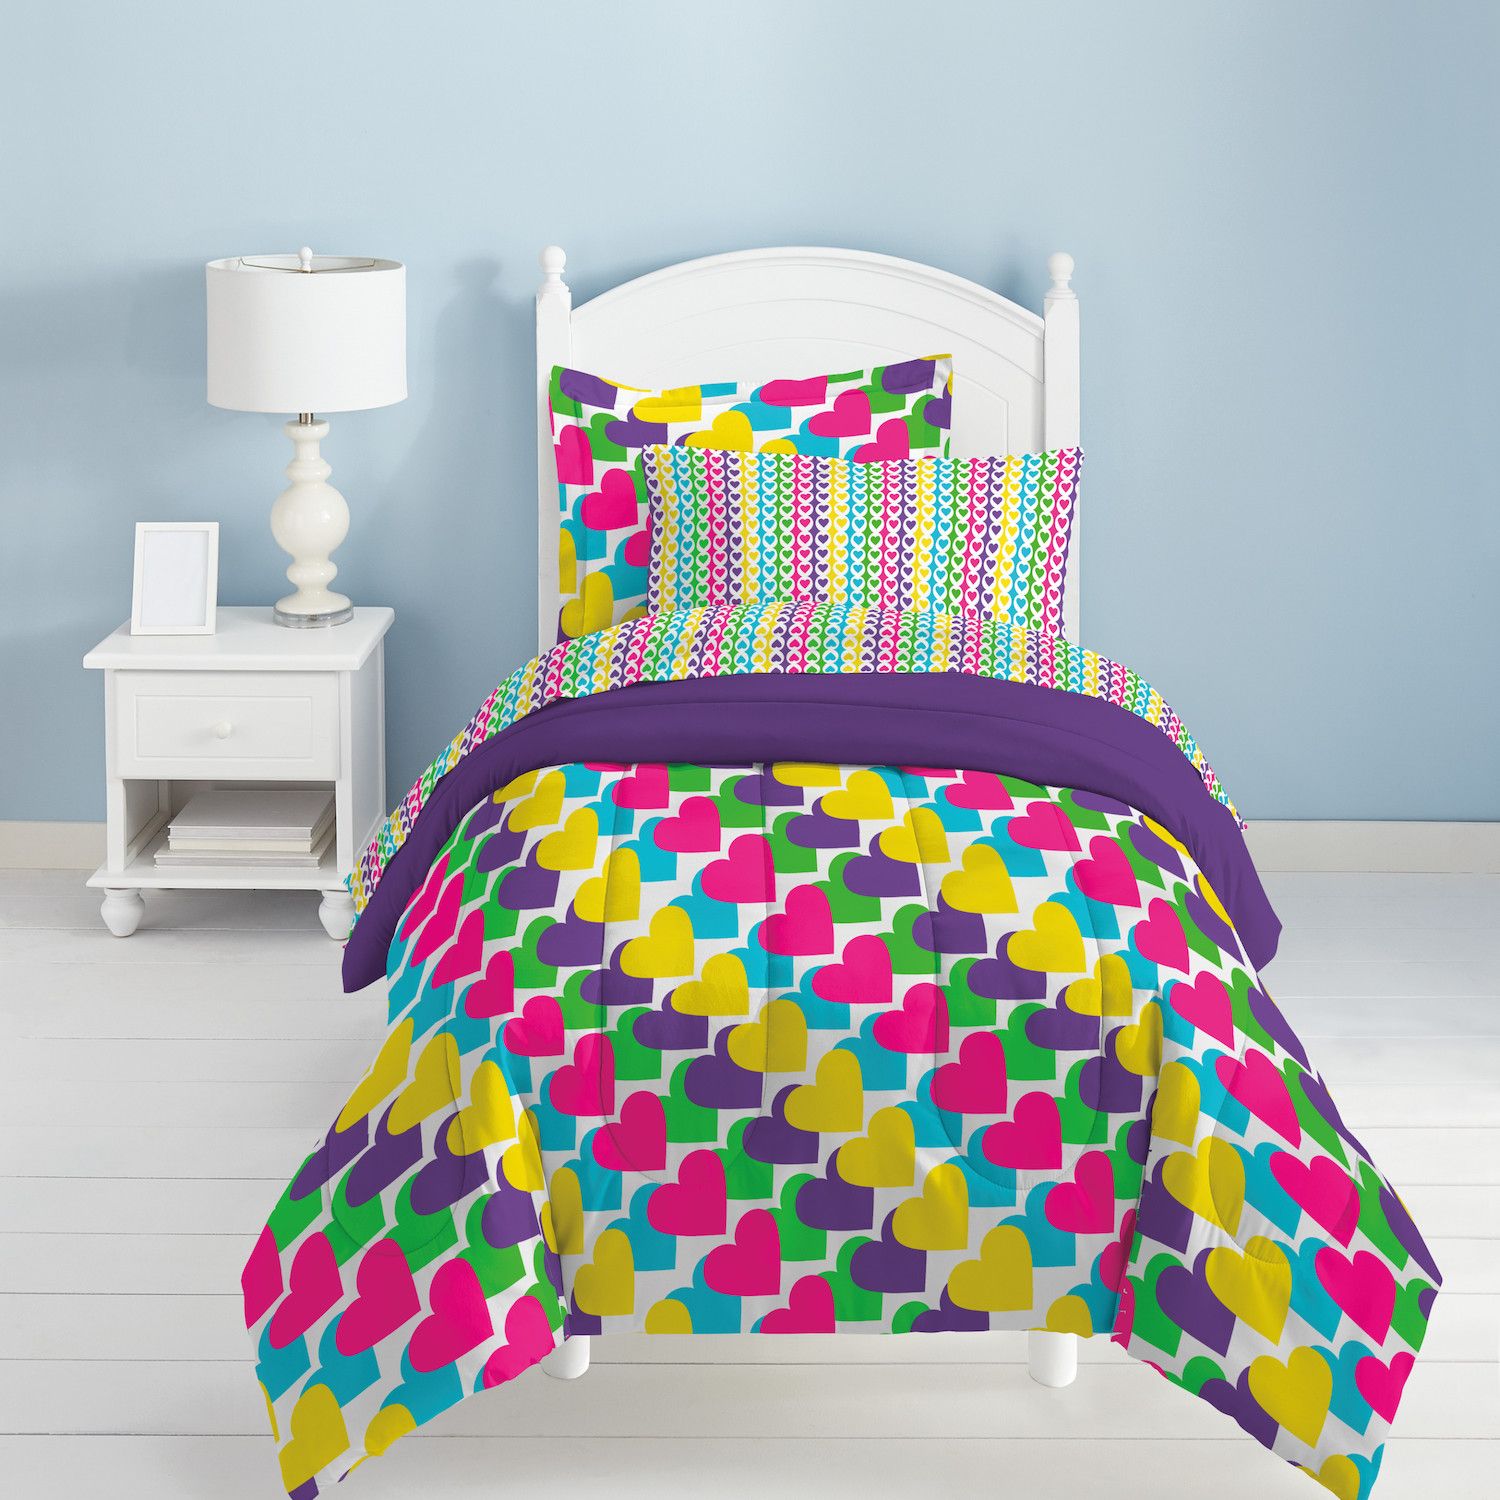 Image for Dream Factory Rainbow Bed Set at Kohl's.